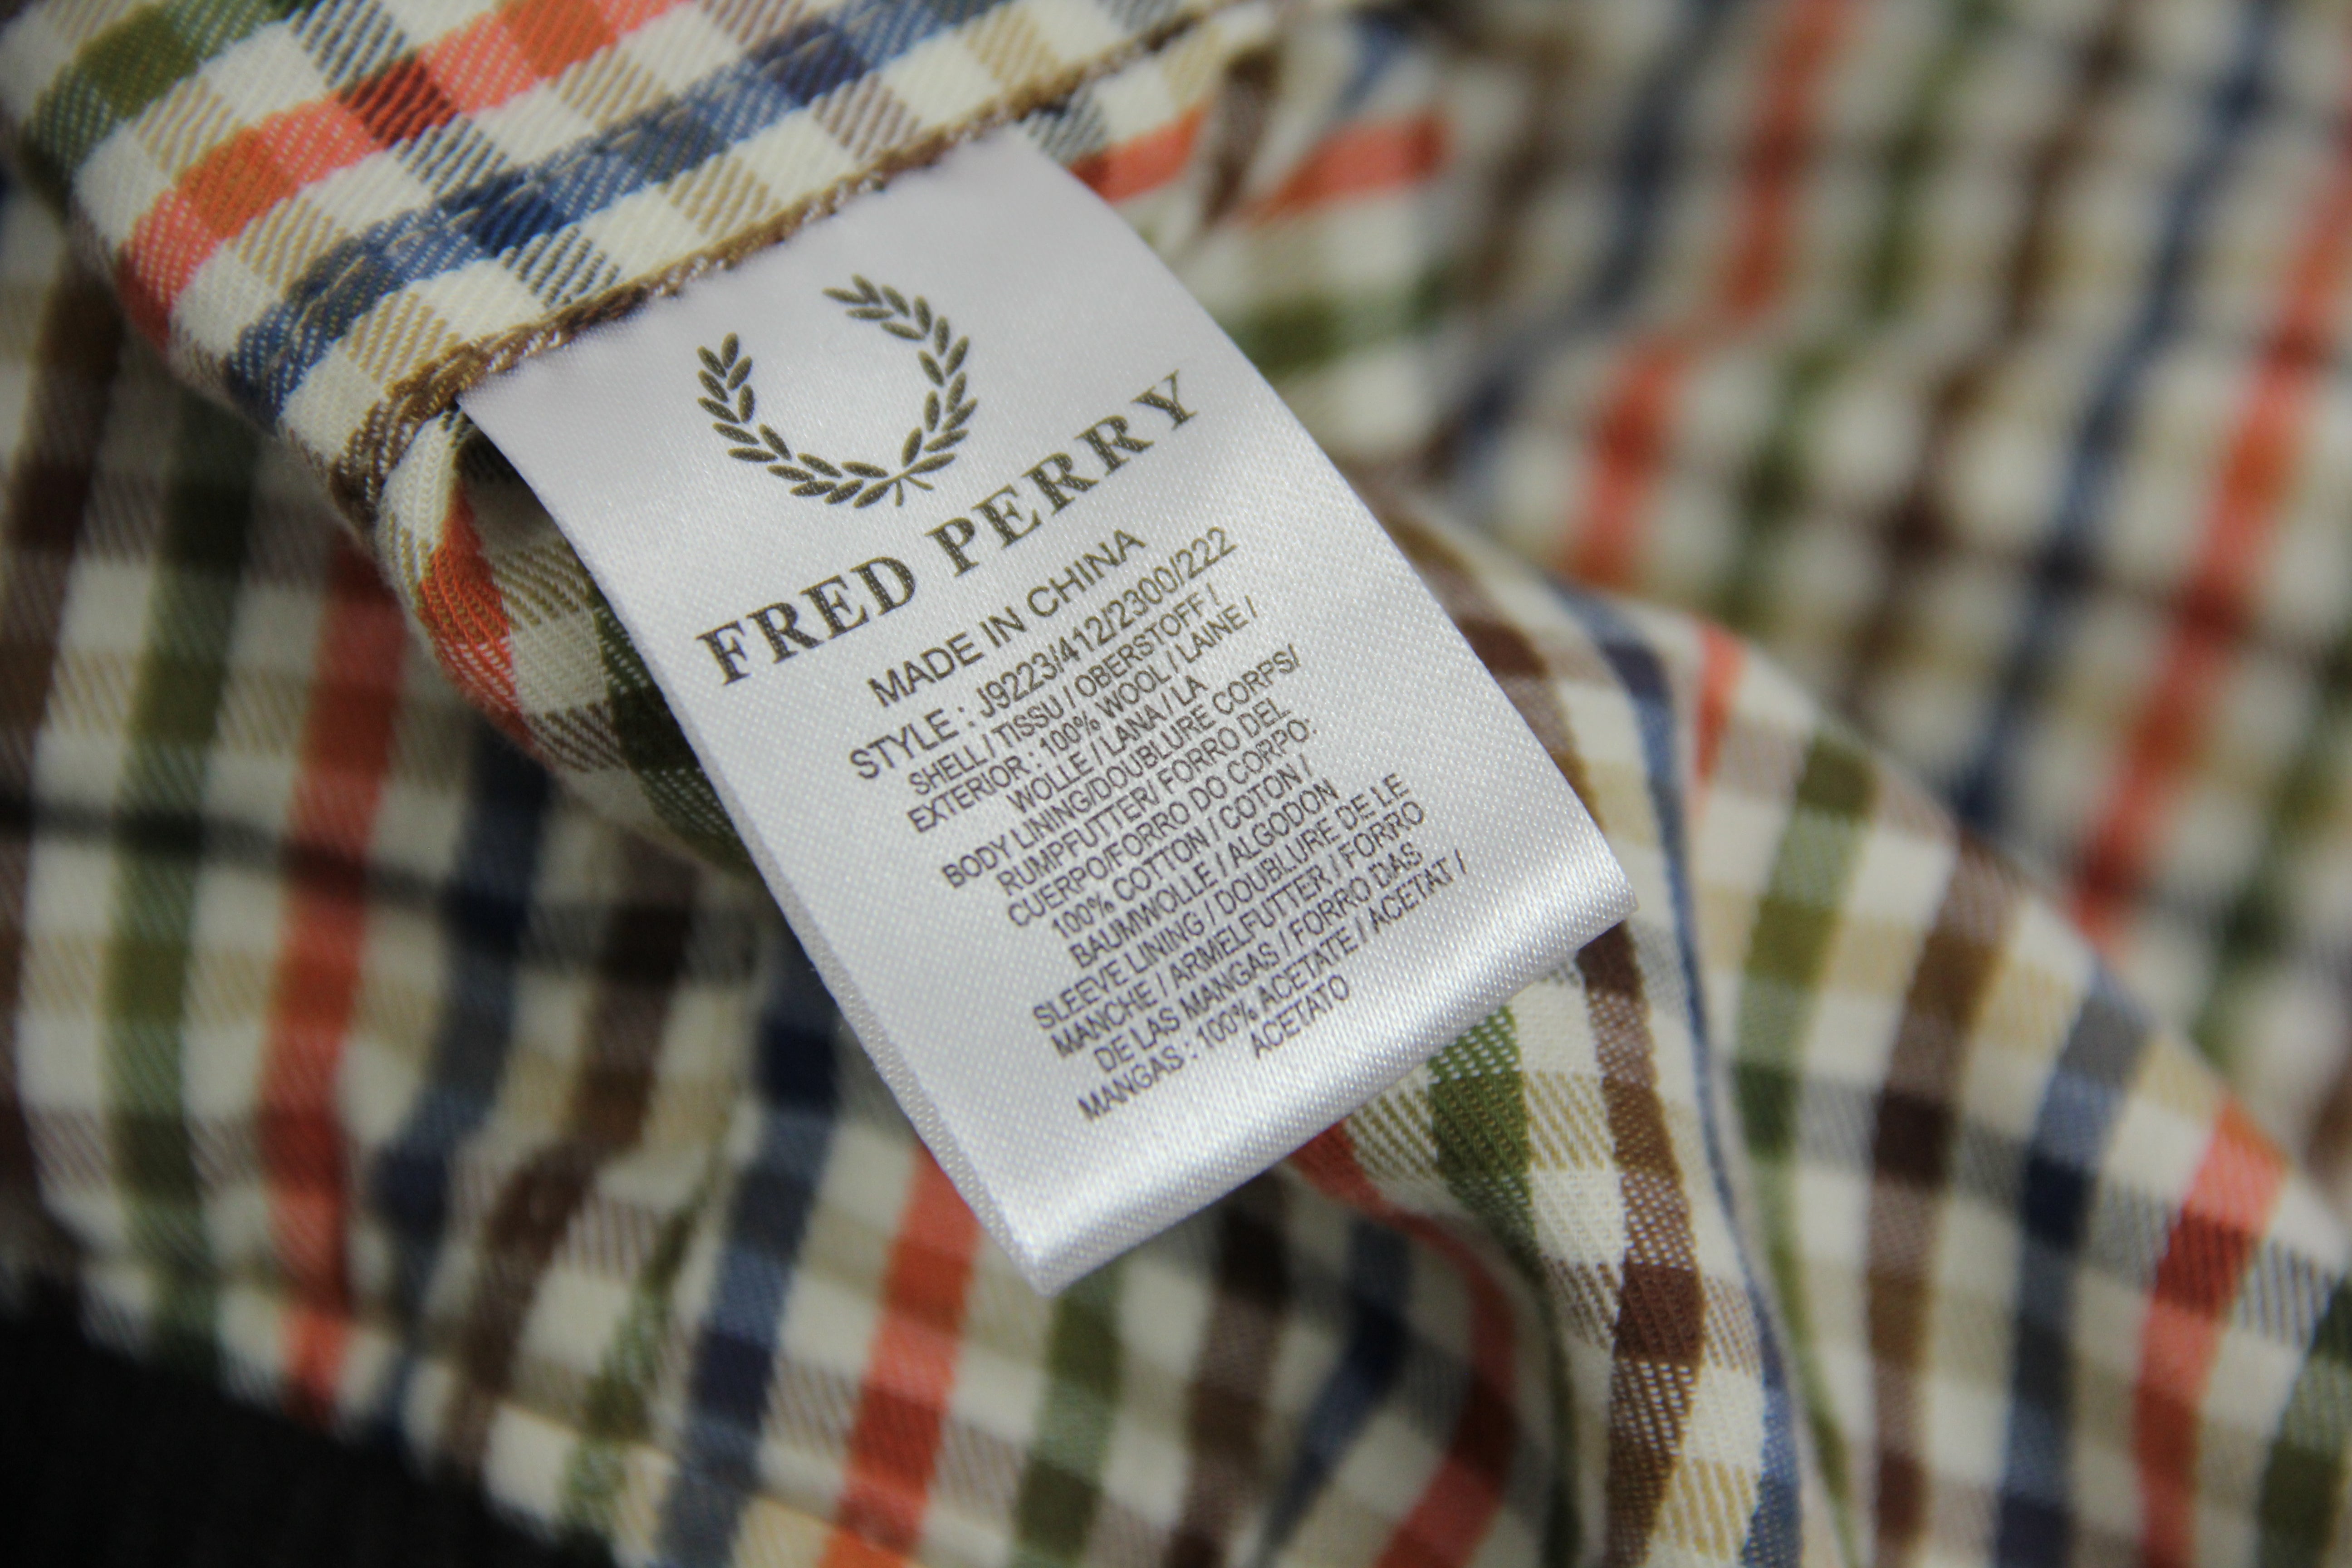 Fred Perry Plaid Wool Harrington Jacket, Size S